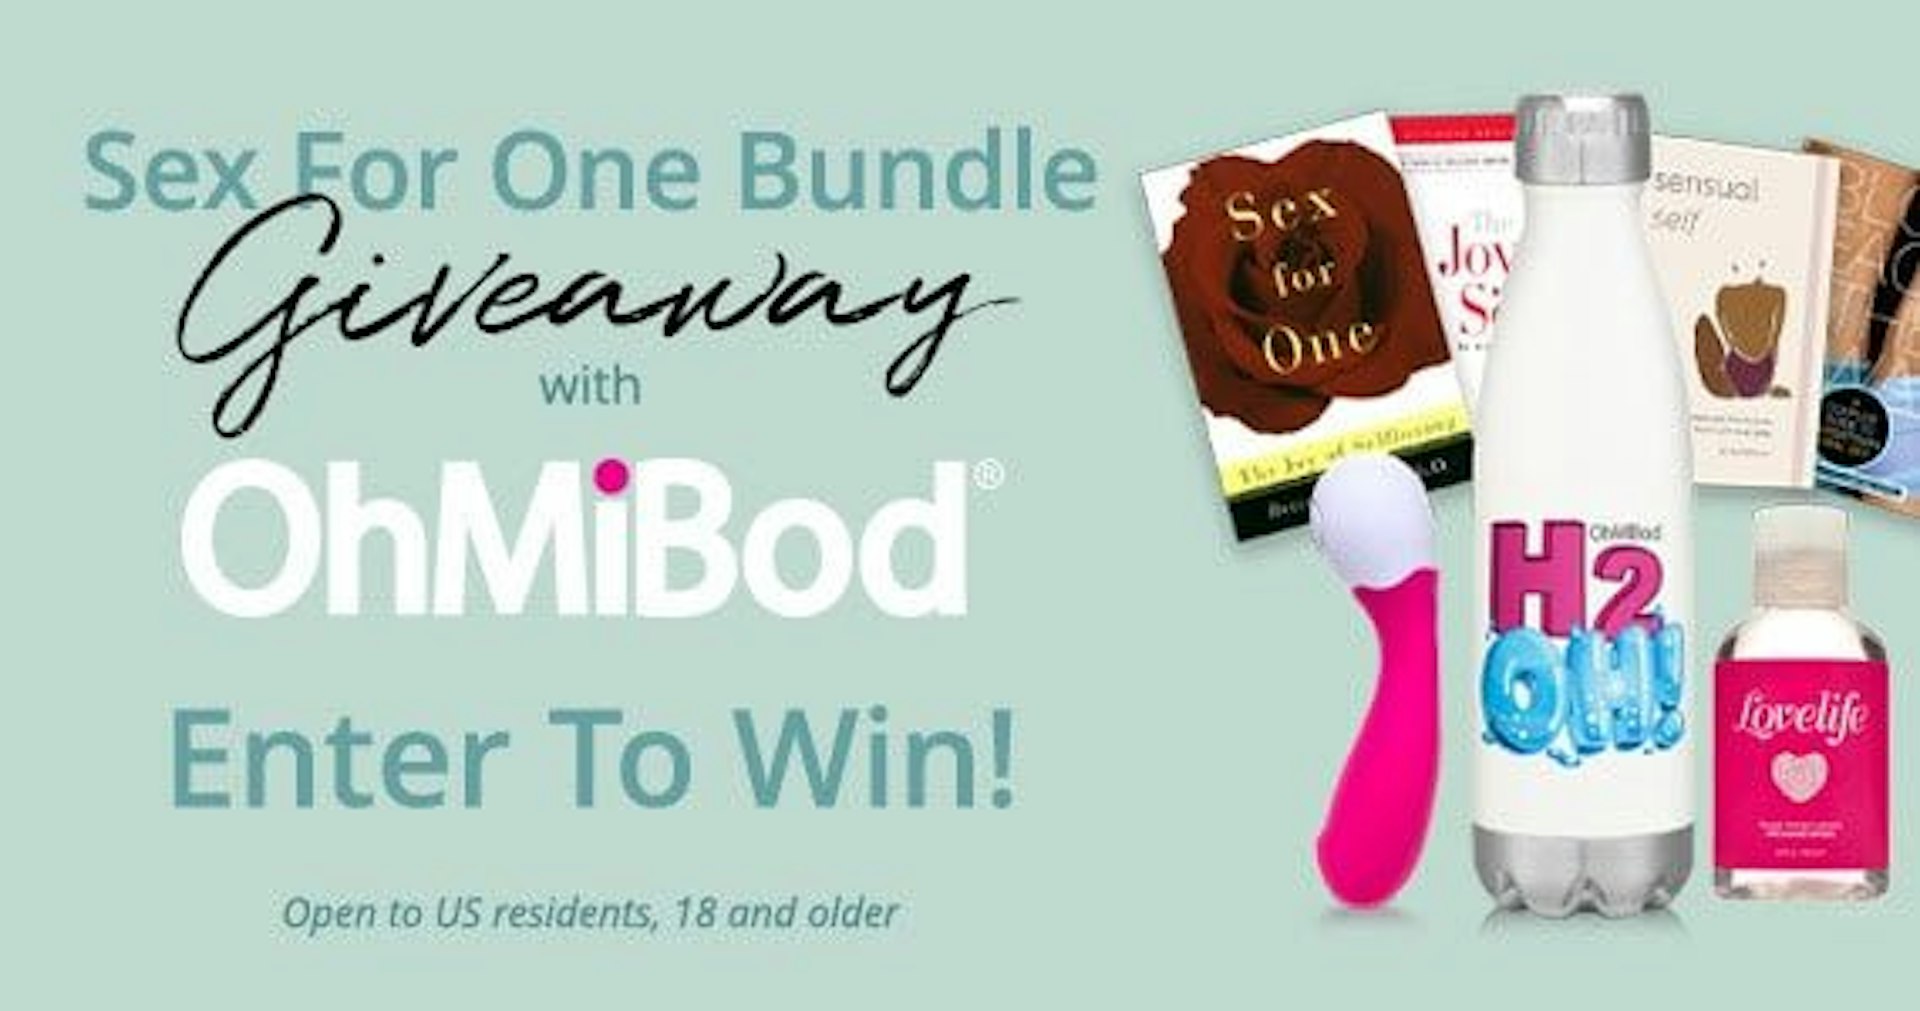 OhMiBod Announces ‘Sex for One Bundle’ Giveaway with Random House